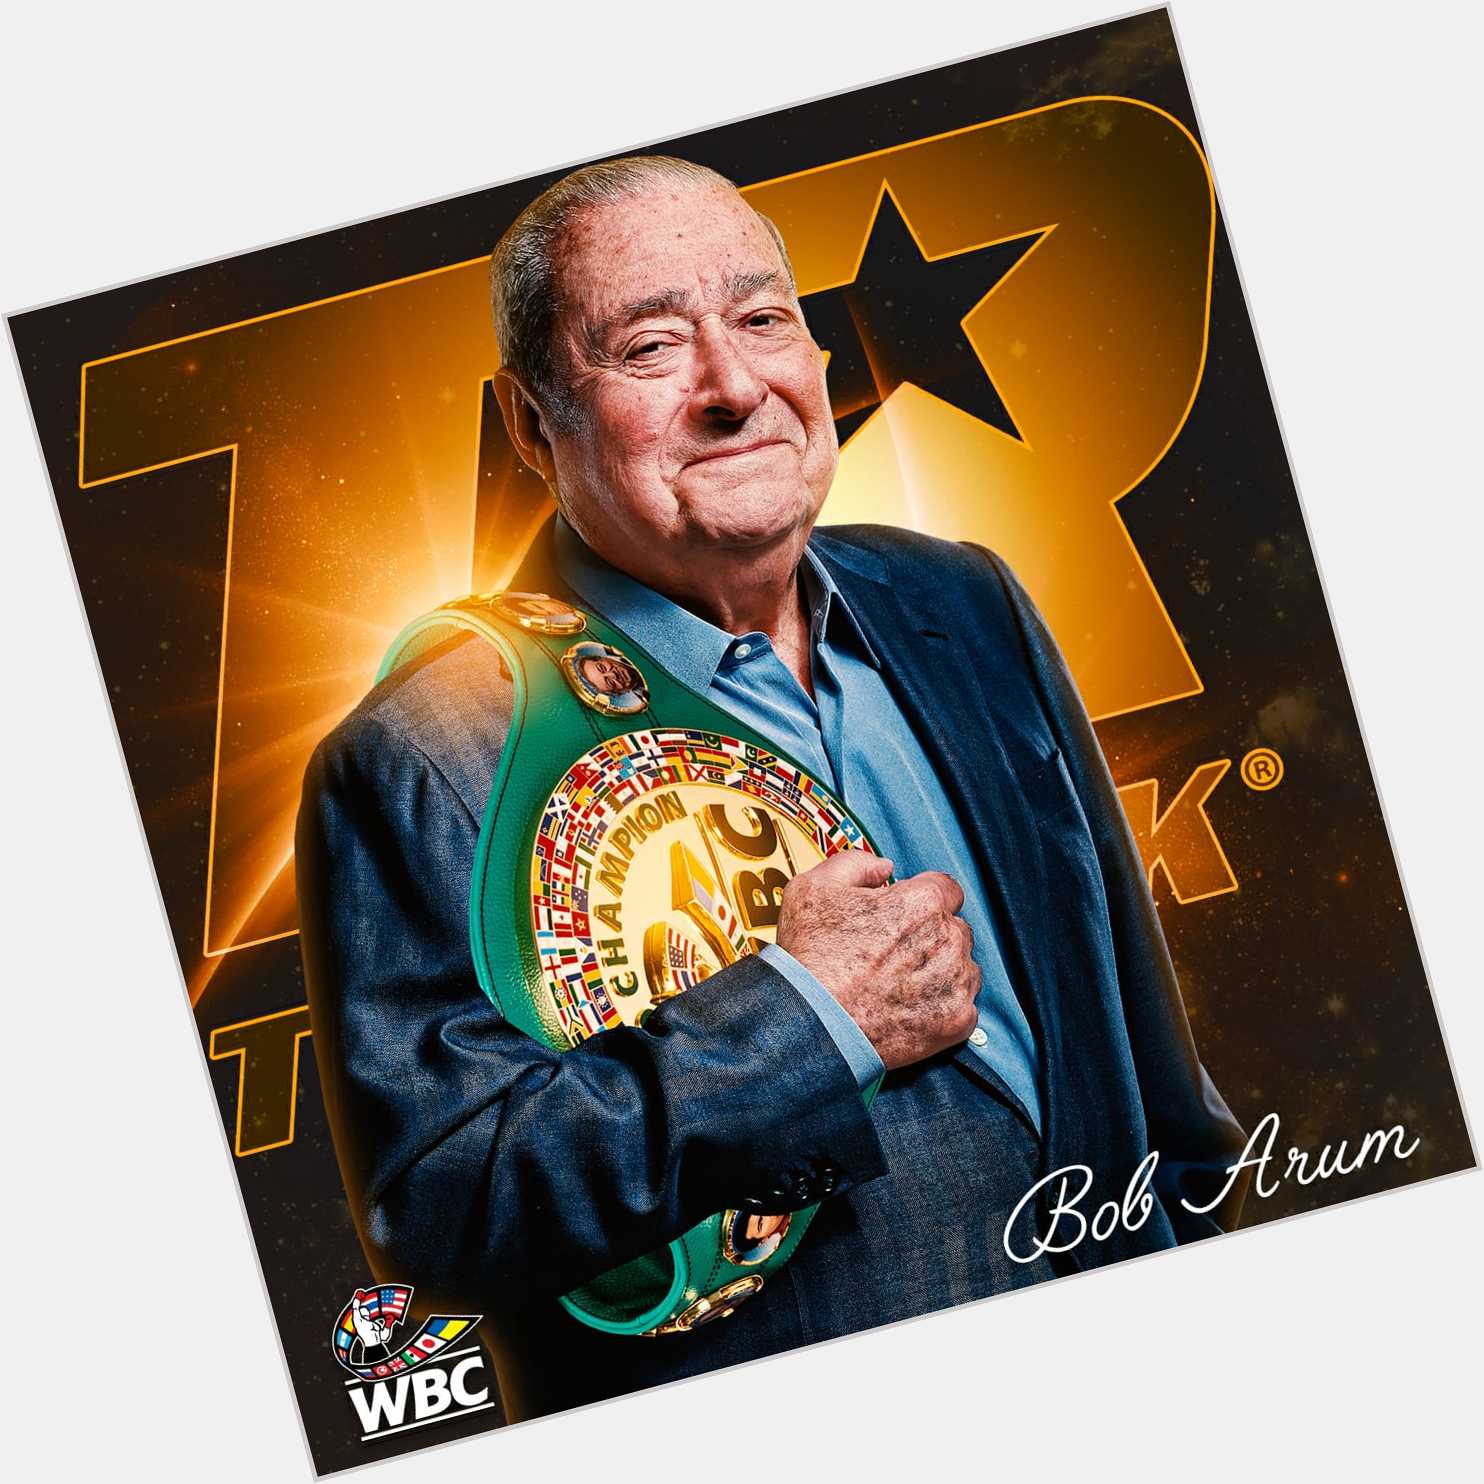    Happy Birthday to Bob Arum!   Which are your Top 3 \s best shows of all time! 